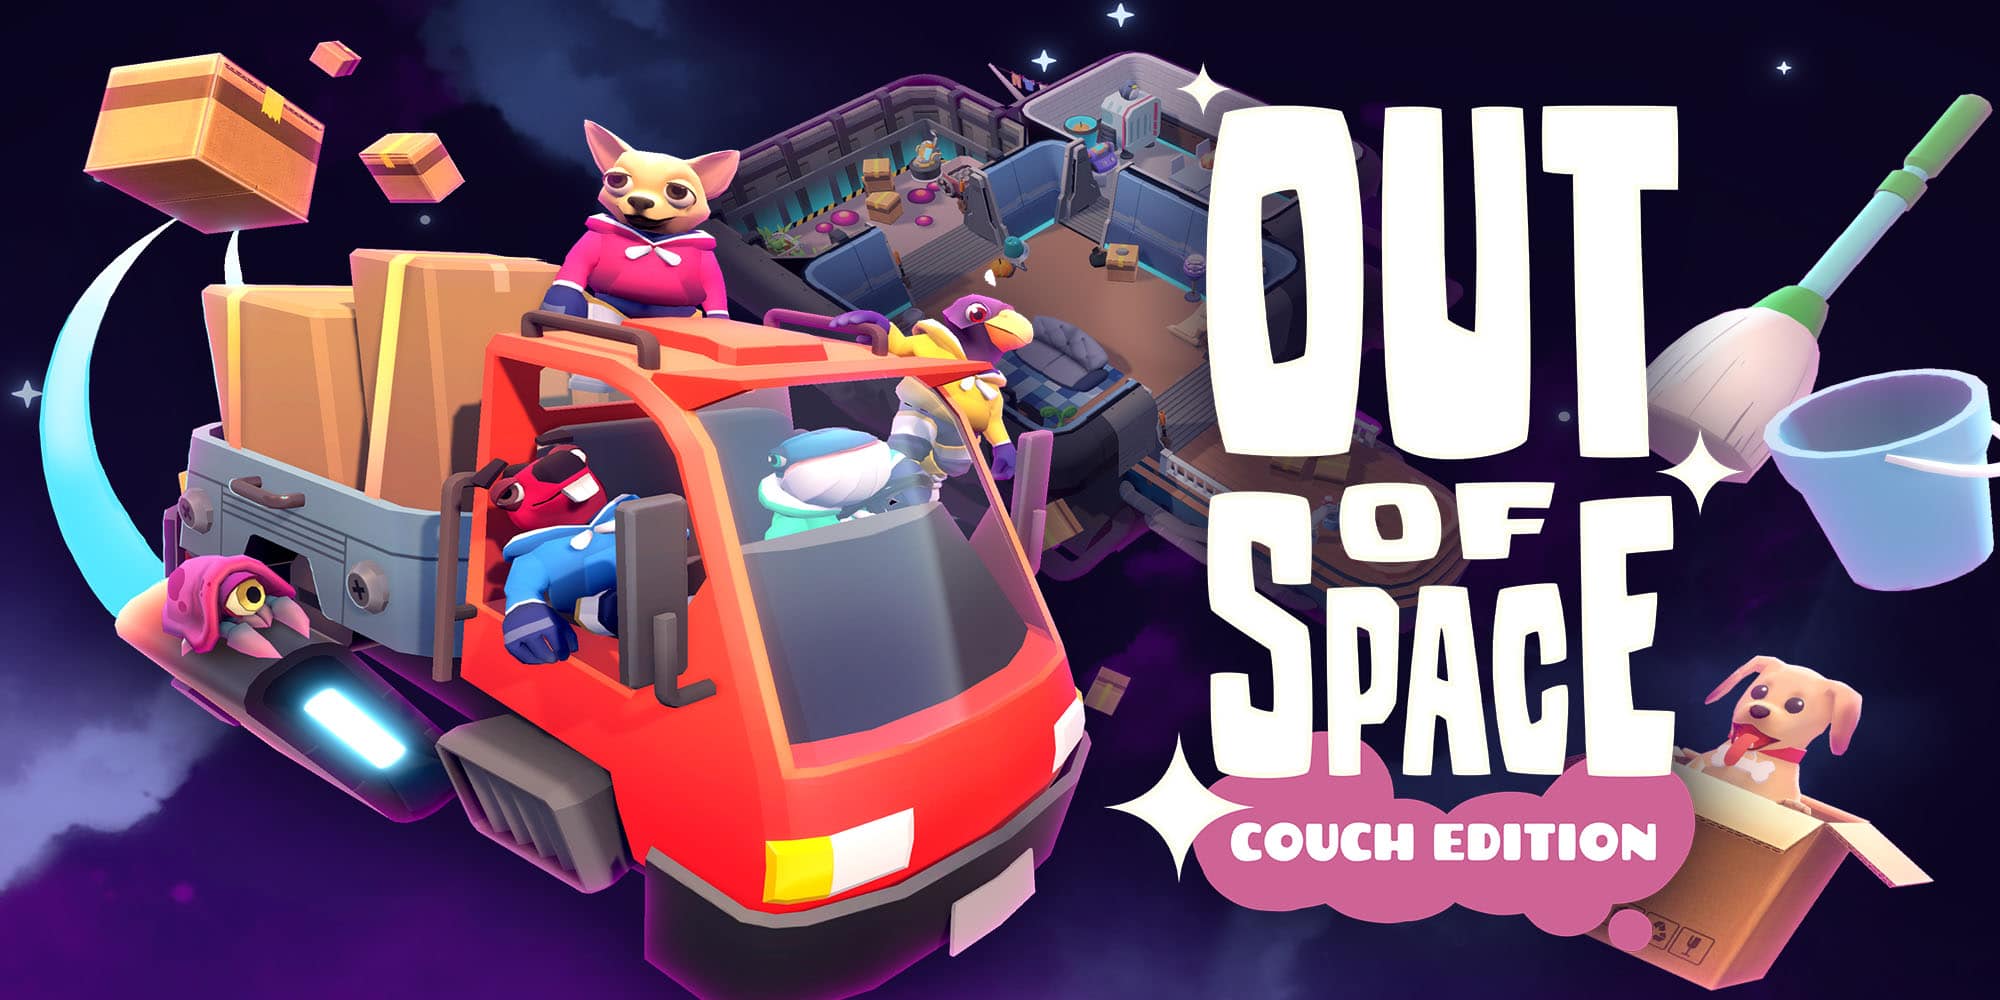 Out of Space: Couch Edition, la recensione per PlayStation 4 6